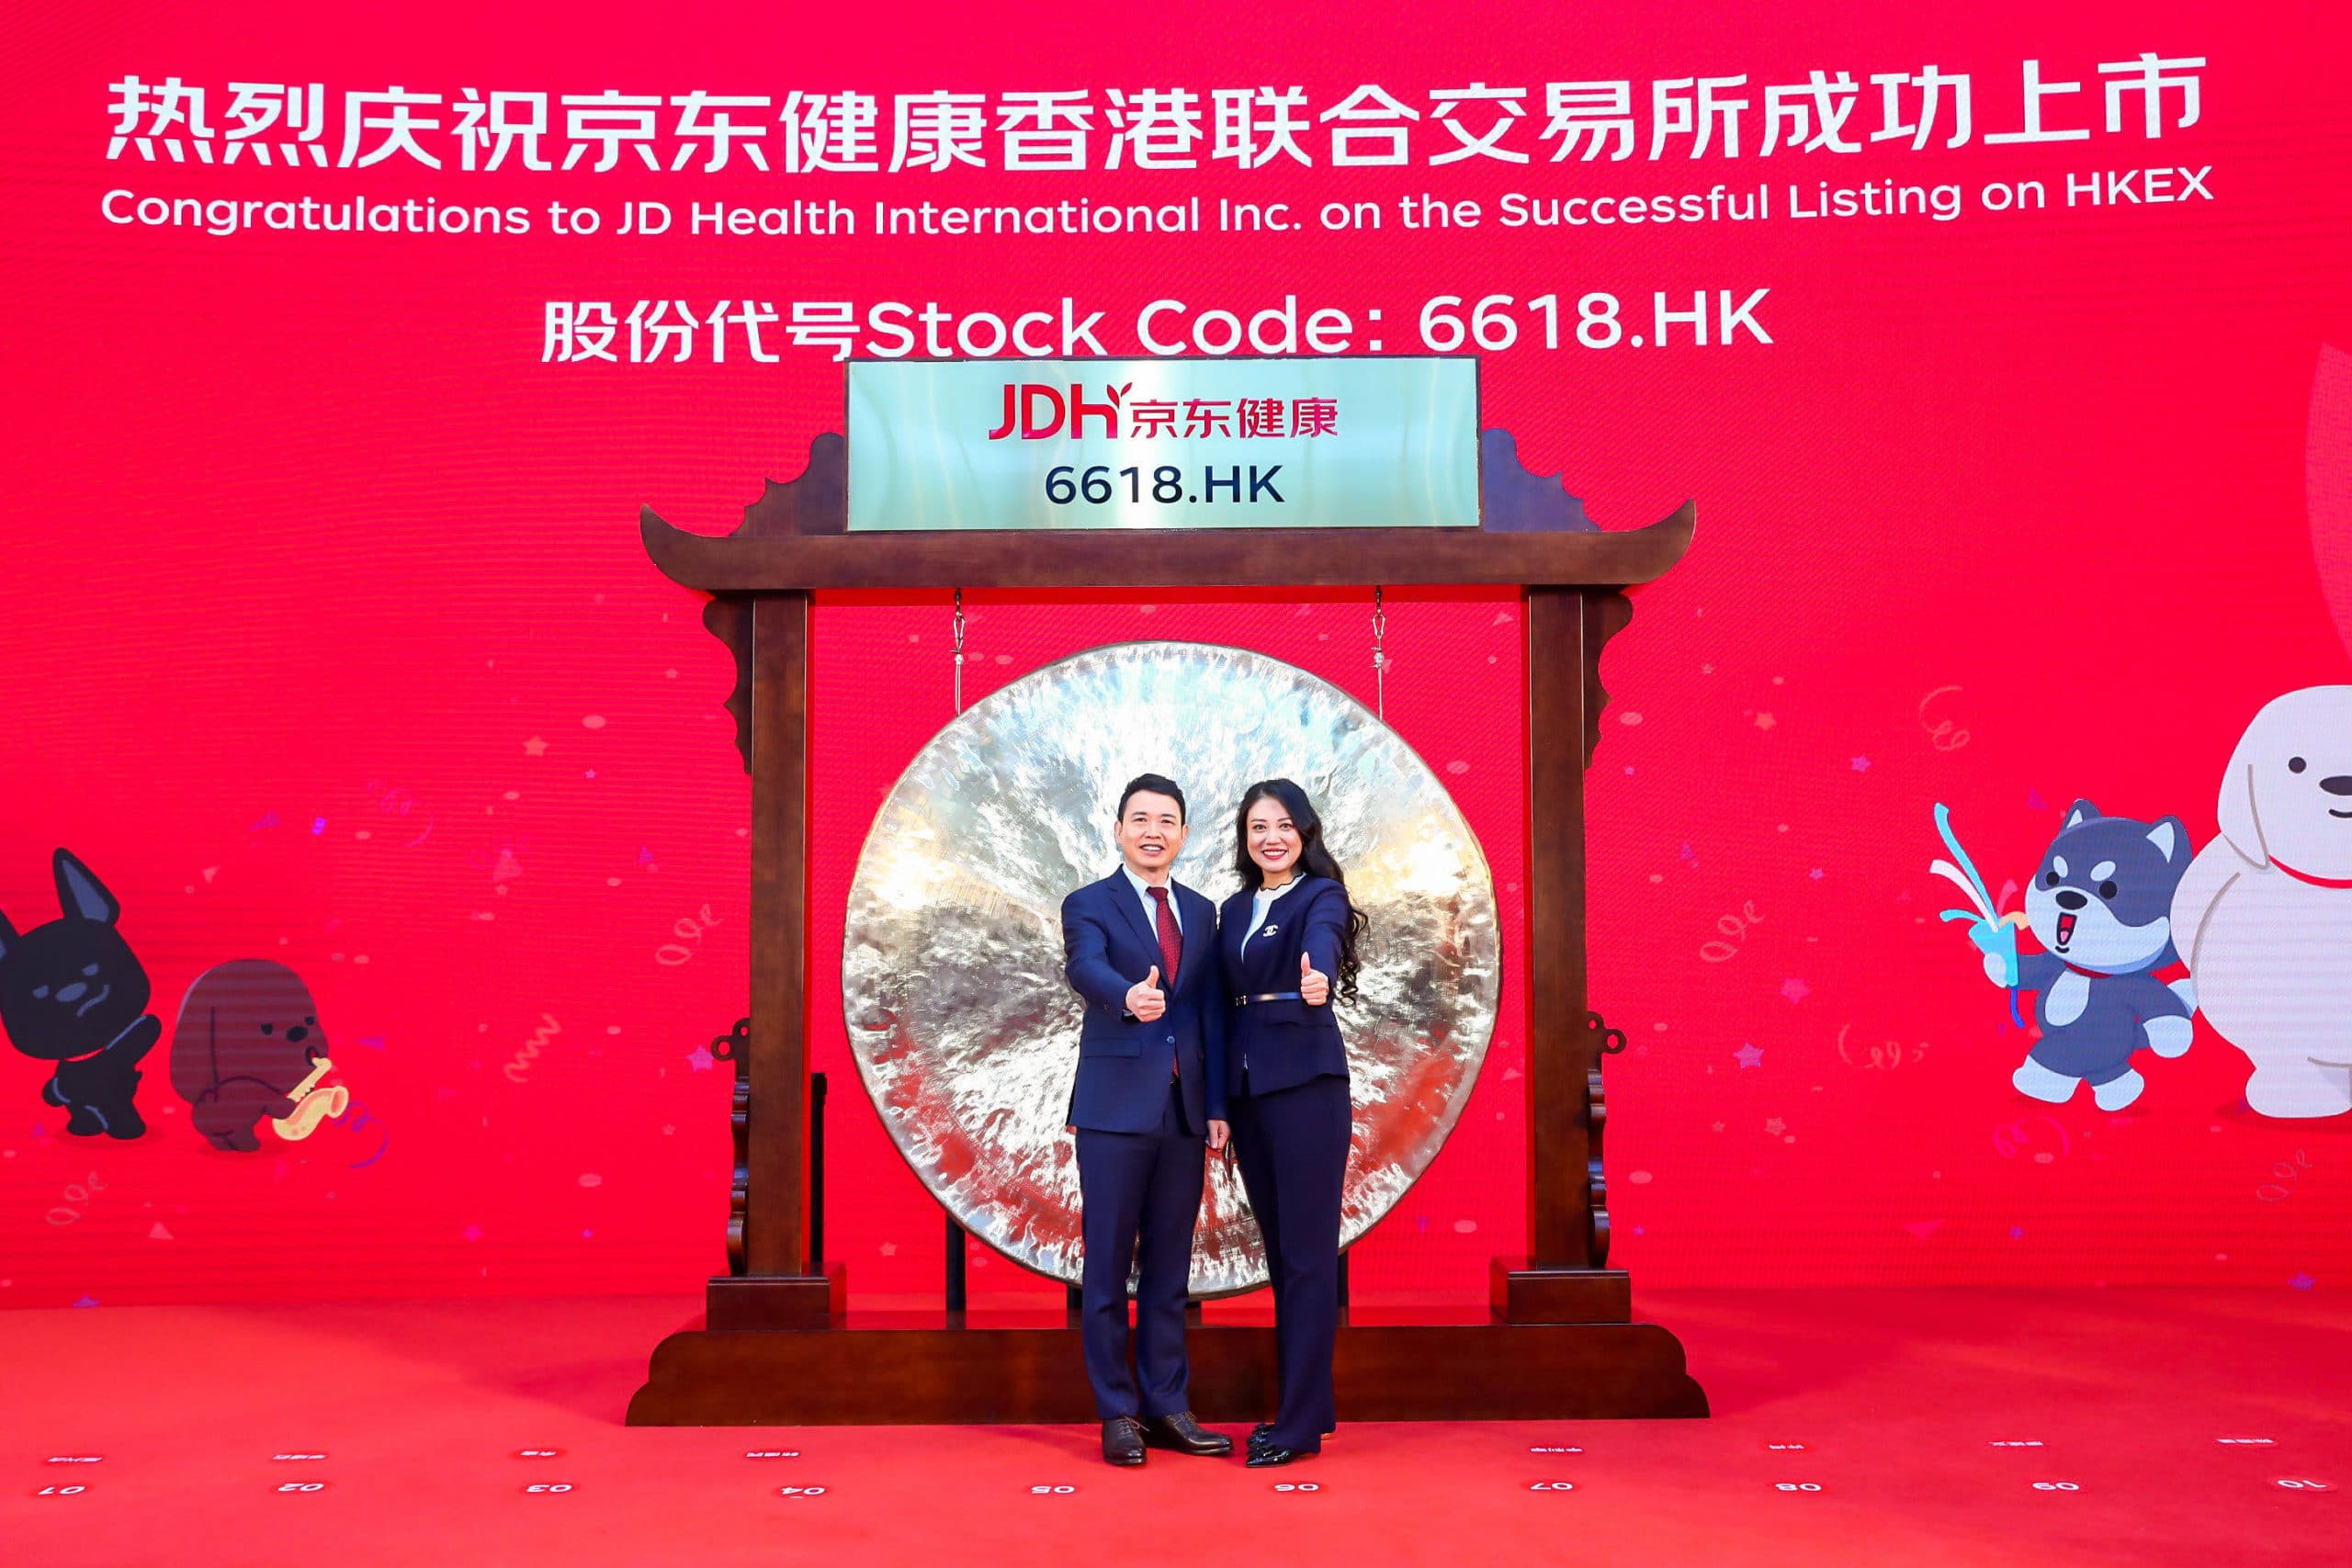 From Left to right: Lijun Xin, CEO of JD Health, Dongyuan Wang, General Manager of JD Health’s Intelligent Medical Services at Celebration Ceremony to Mark JD Health's Successful Listing on HKEX